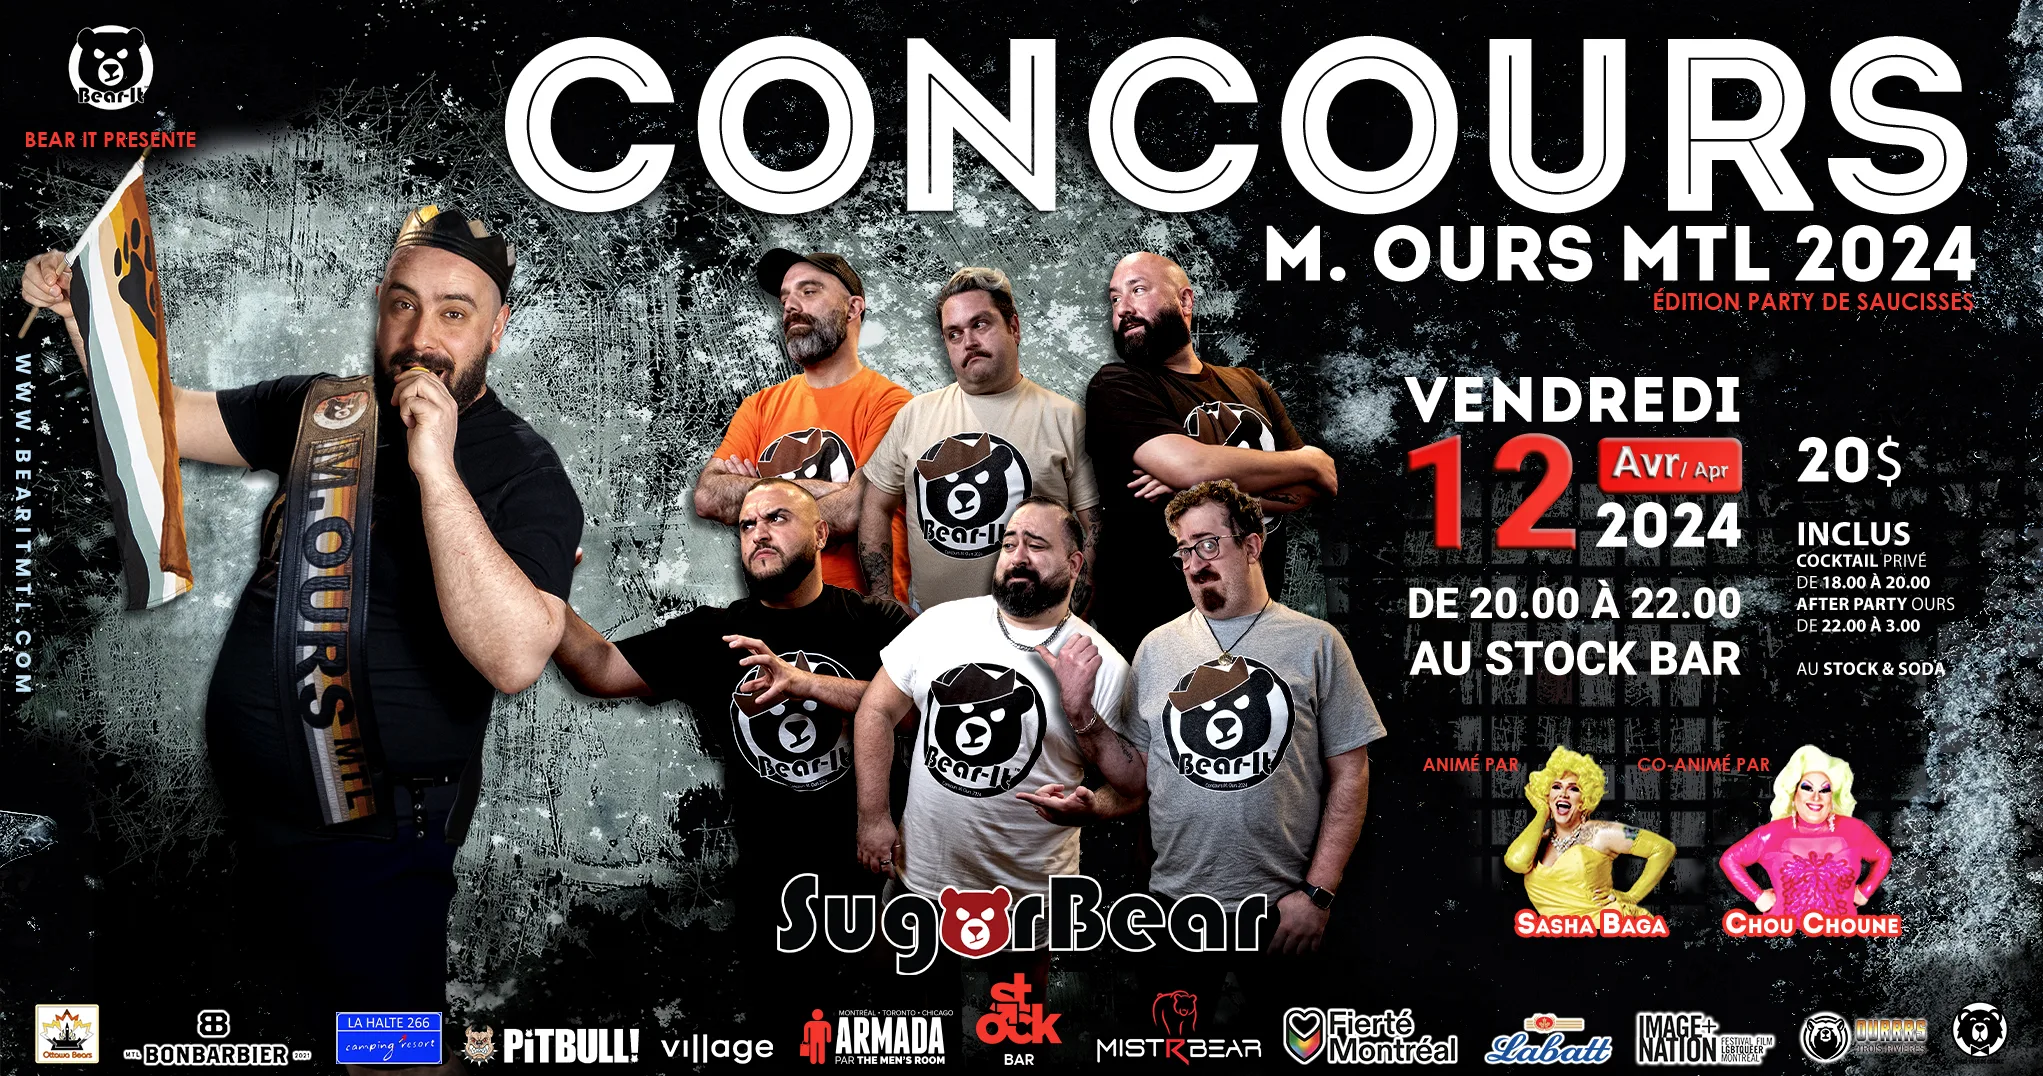 Concours M. Ours Mtl 2024